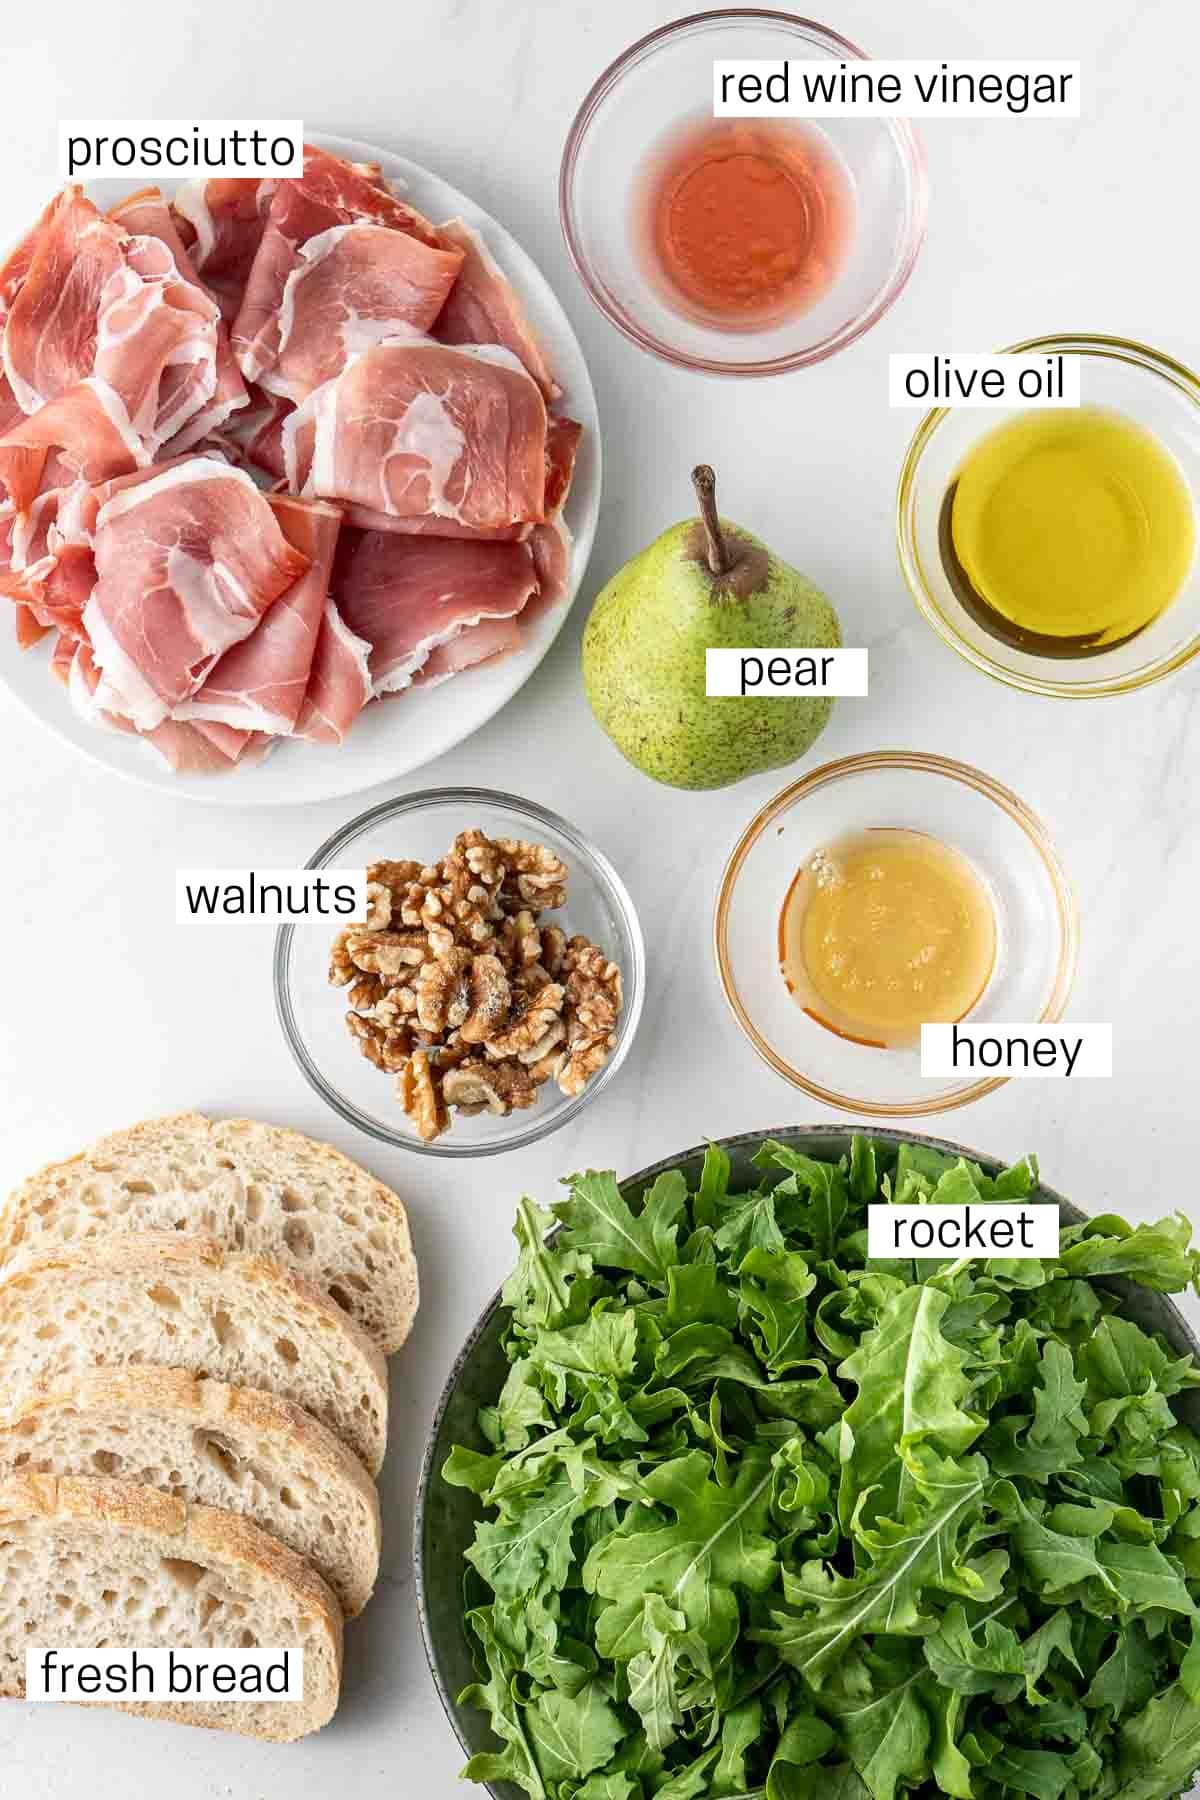 All ingredients needed for pear and prosciutto salad laid out in bowls.